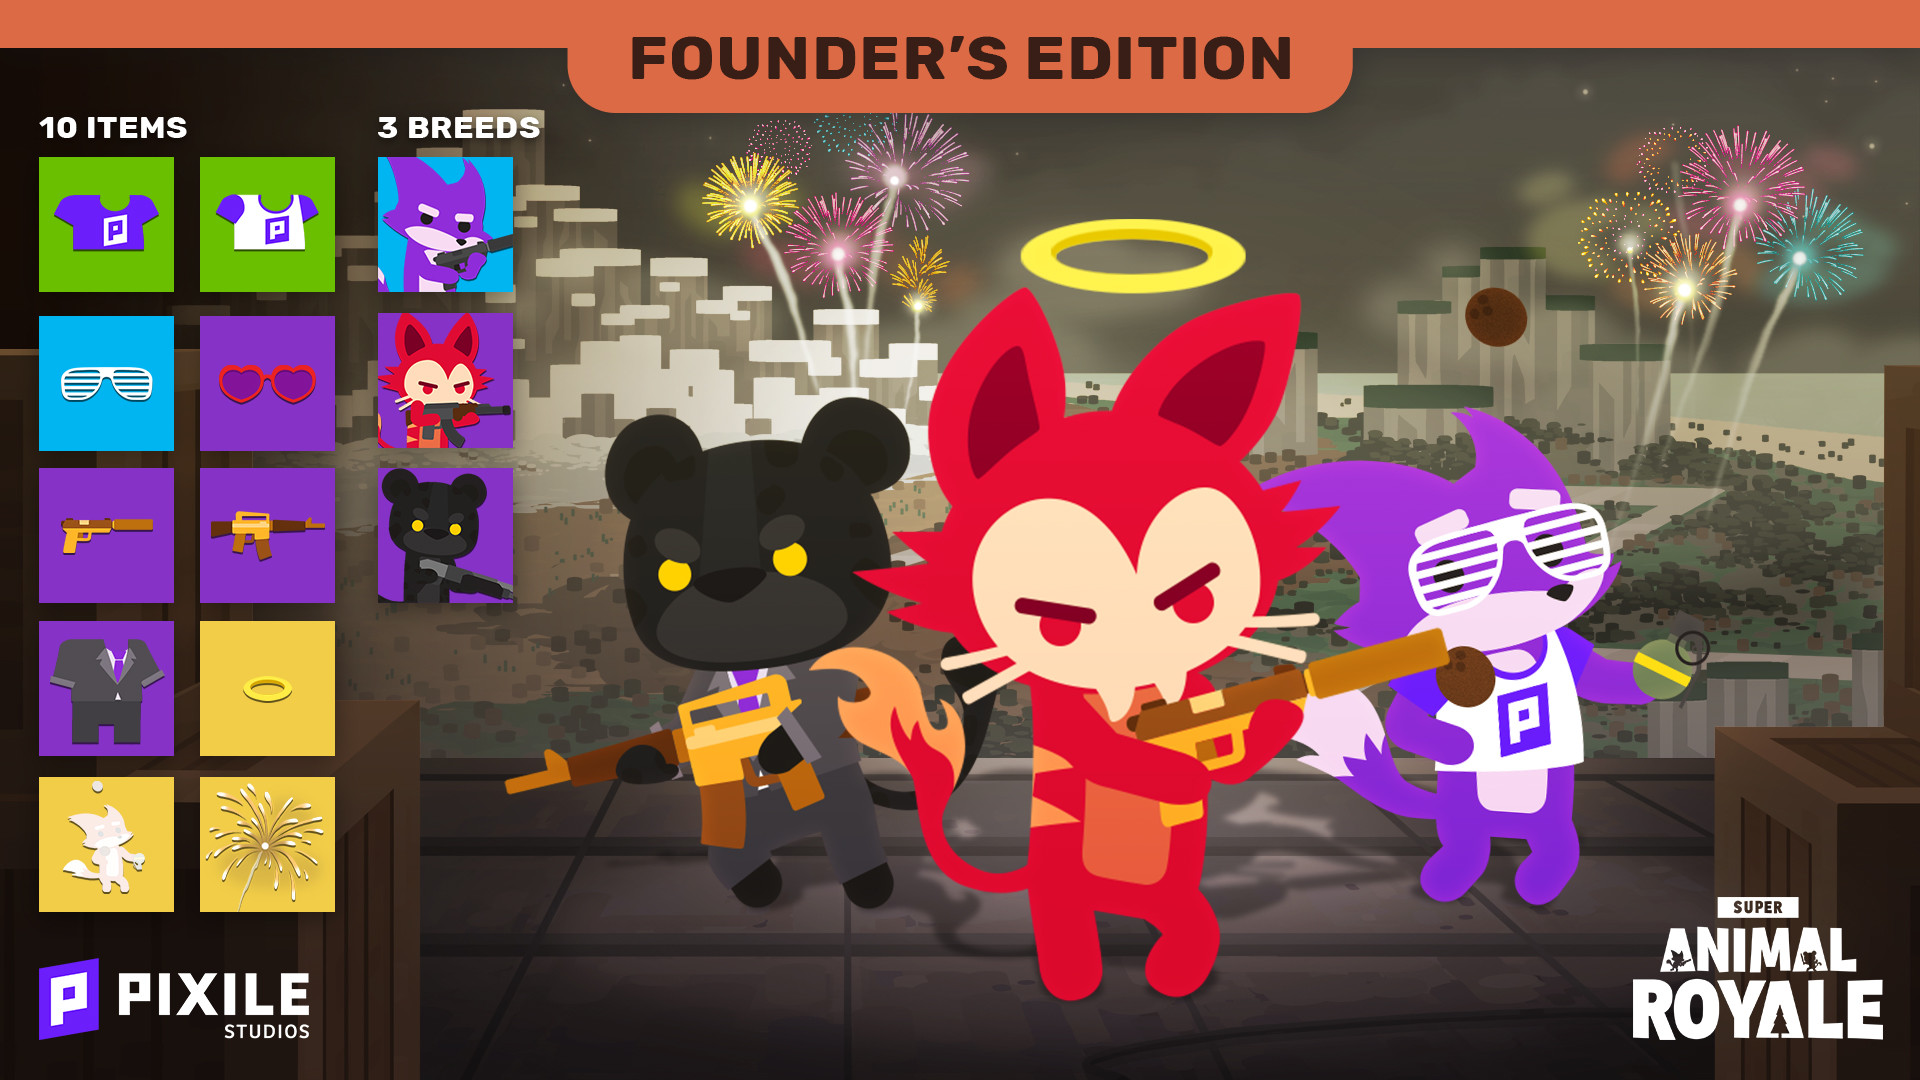 Super Animal Royale Founder's Edition Featured Screenshot #1